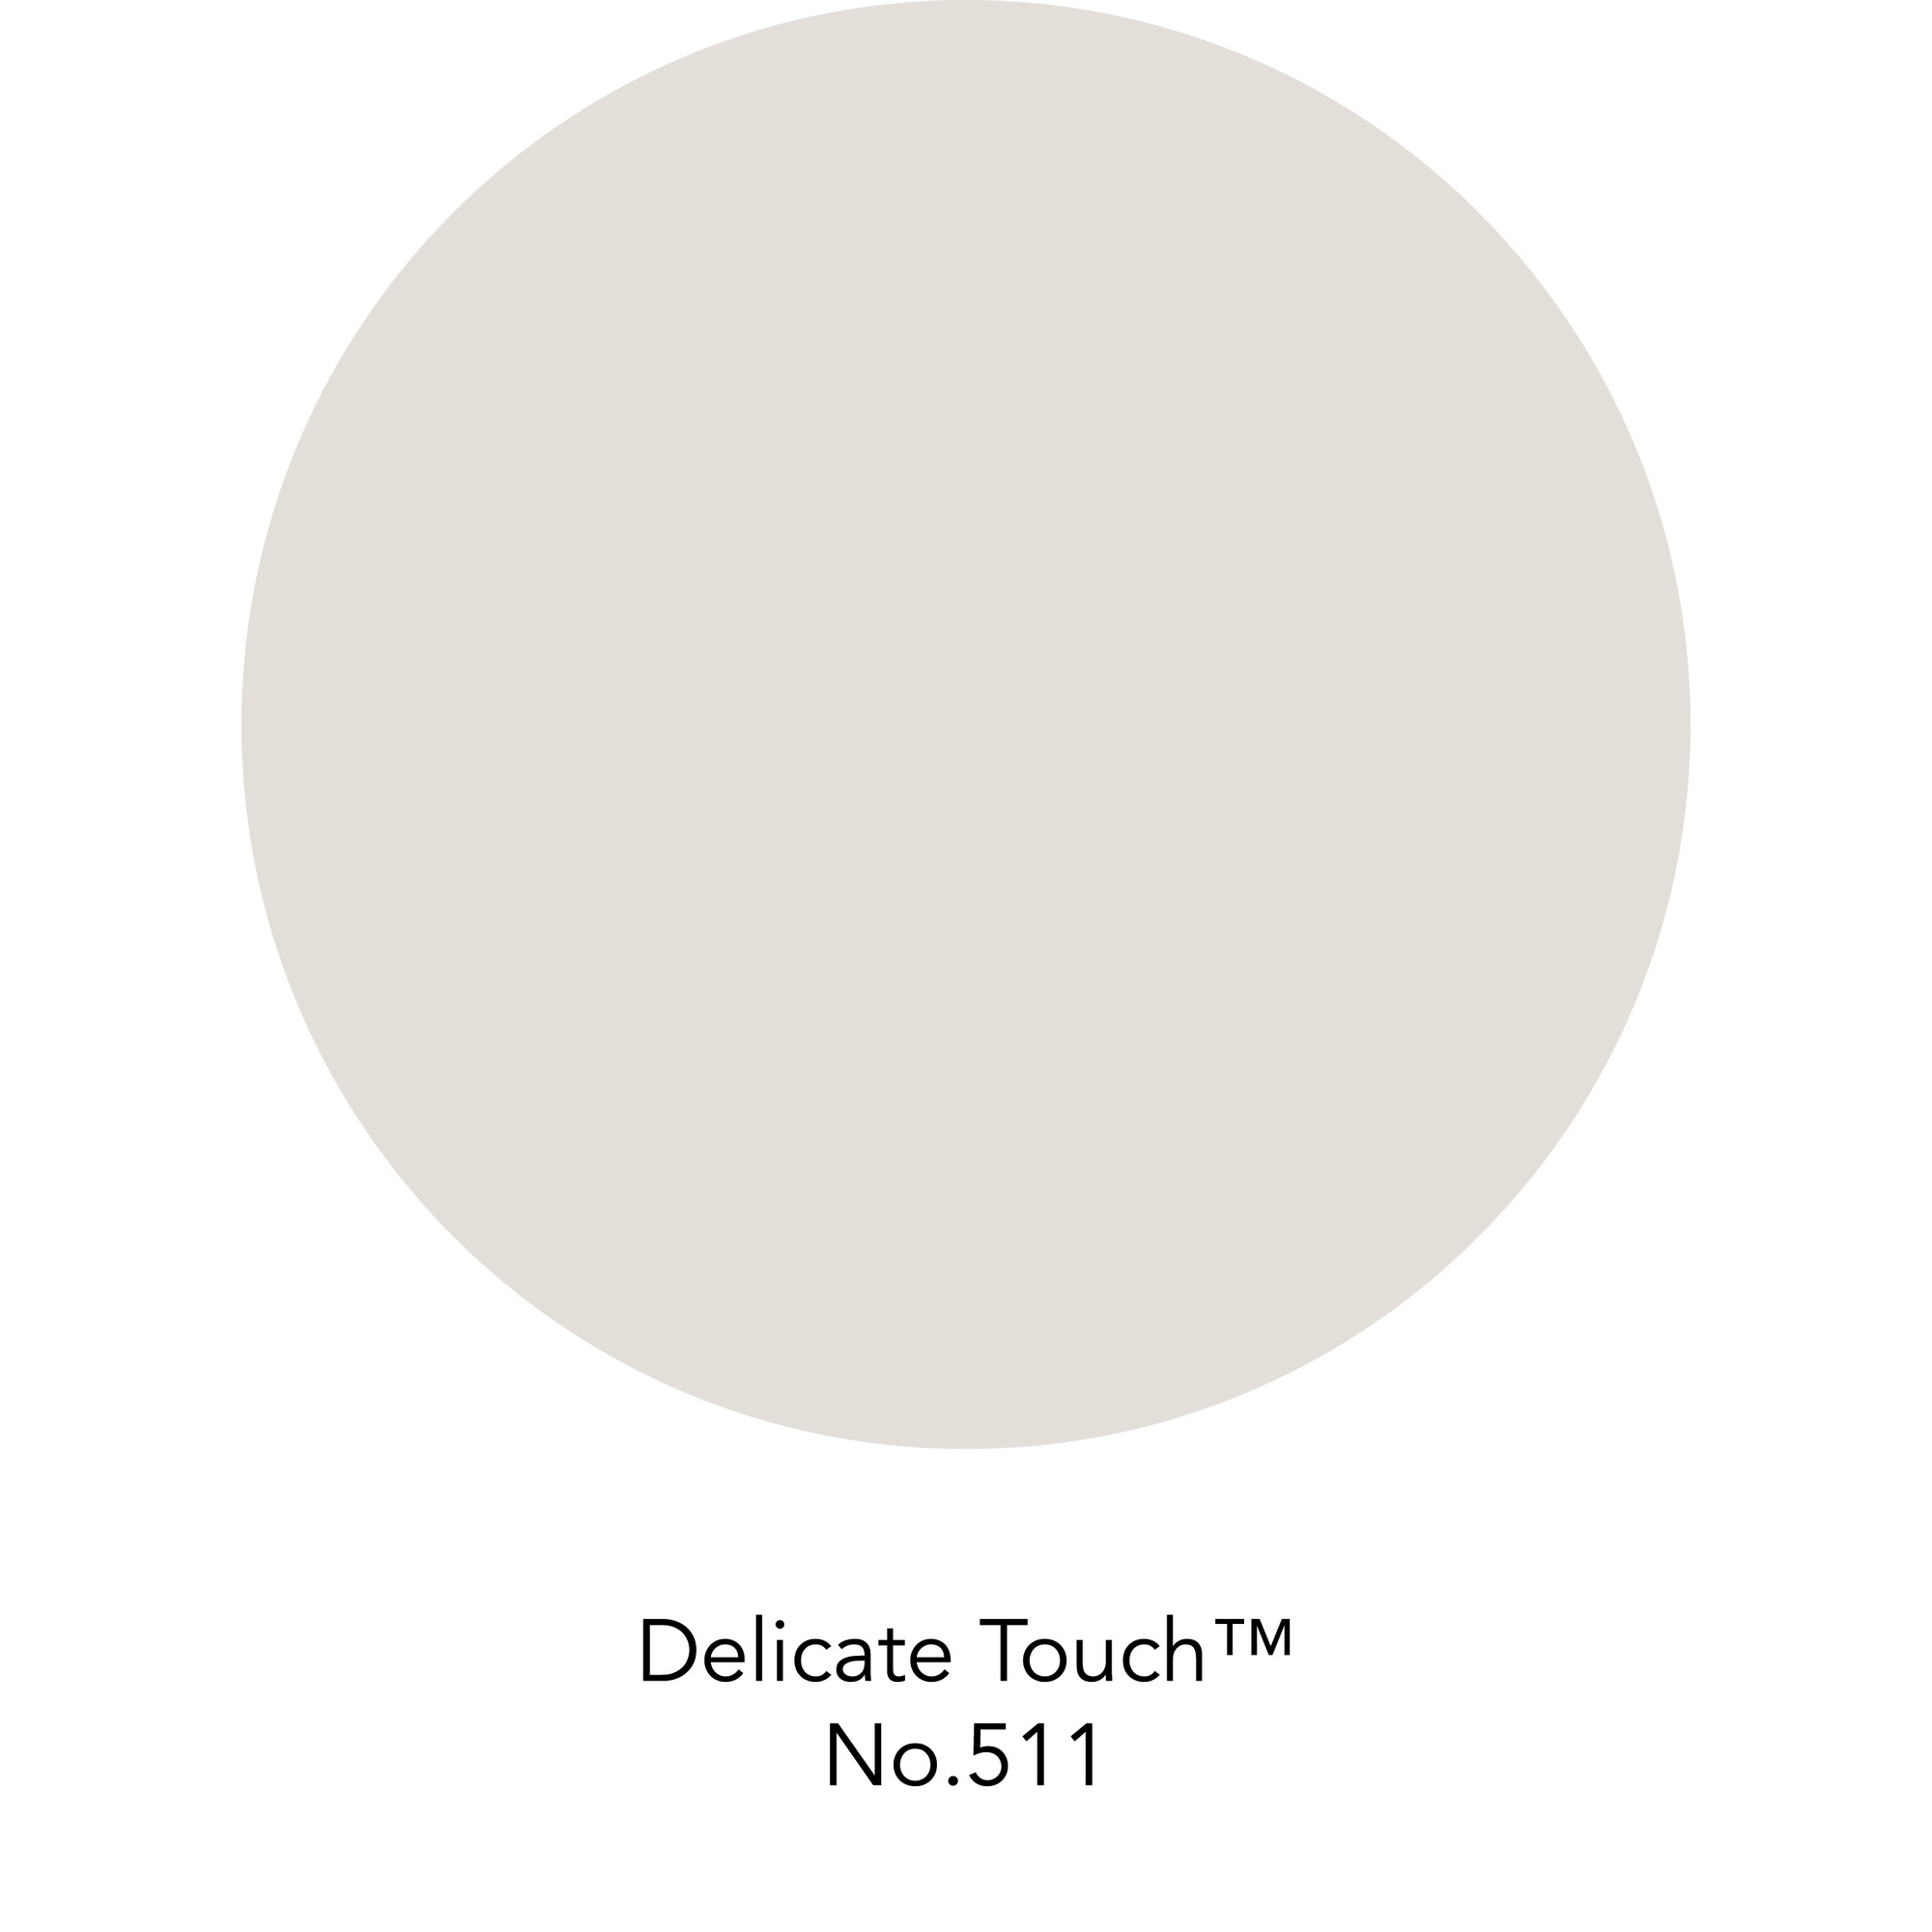 Wandfarbe 'Delicate Touch No. 511' beige matt 125 ml + product picture